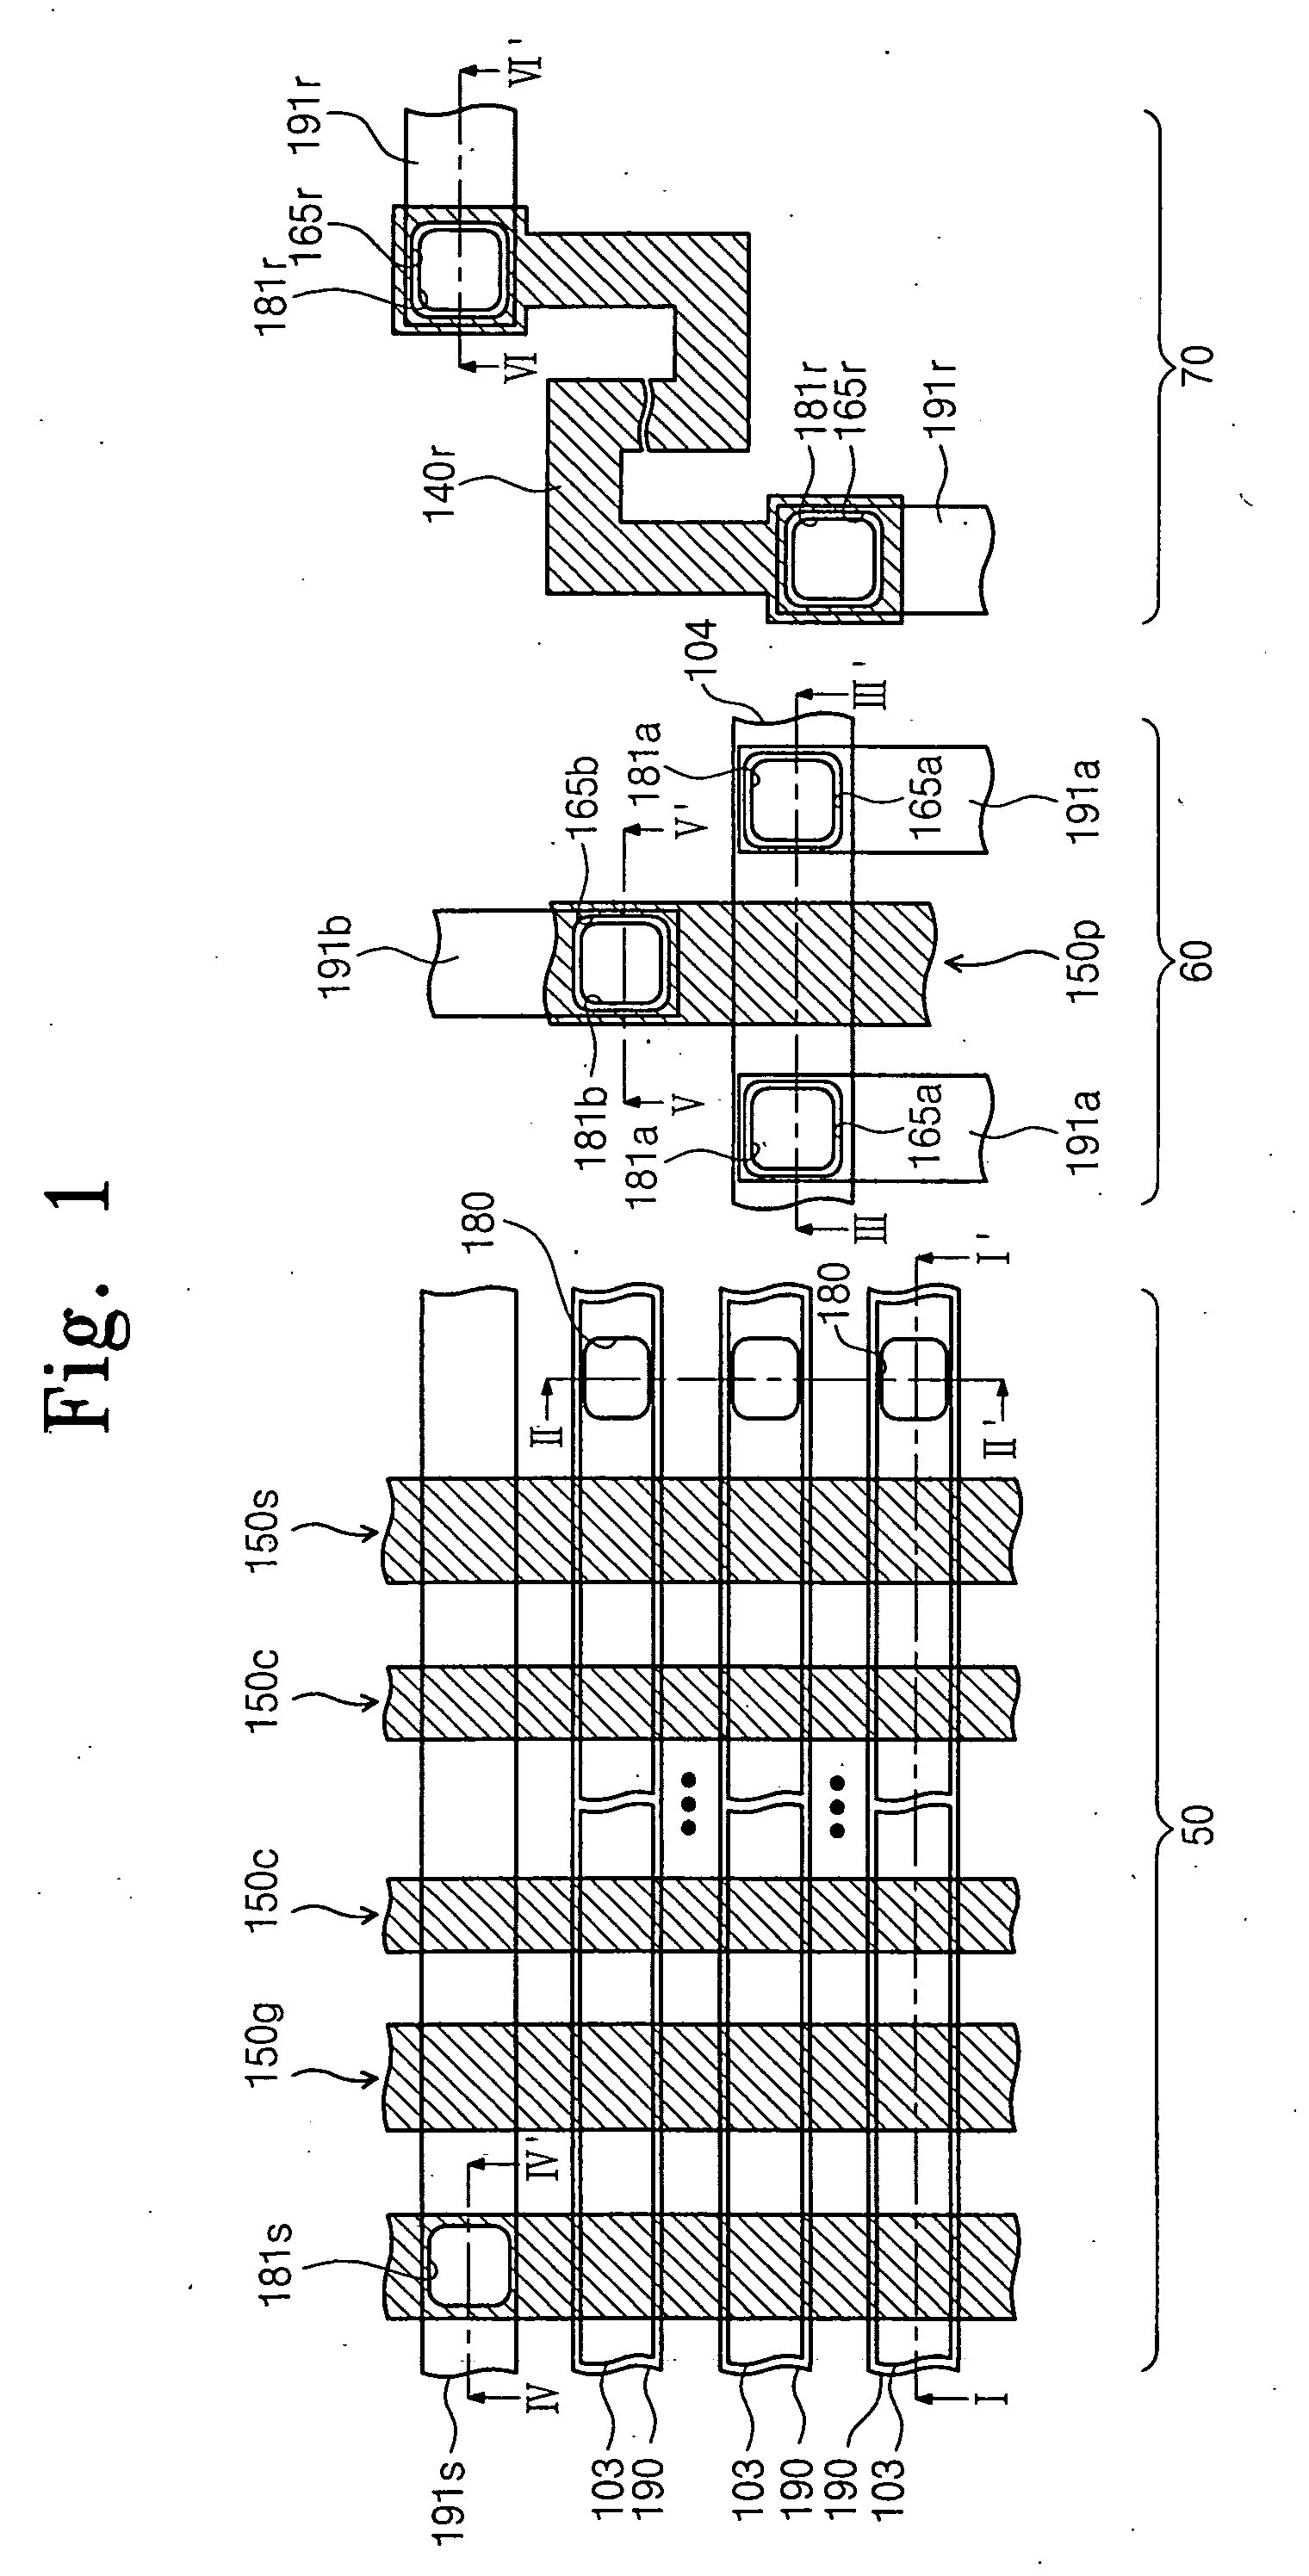 NAND-type nonvolatile memory device and related method of manufacture